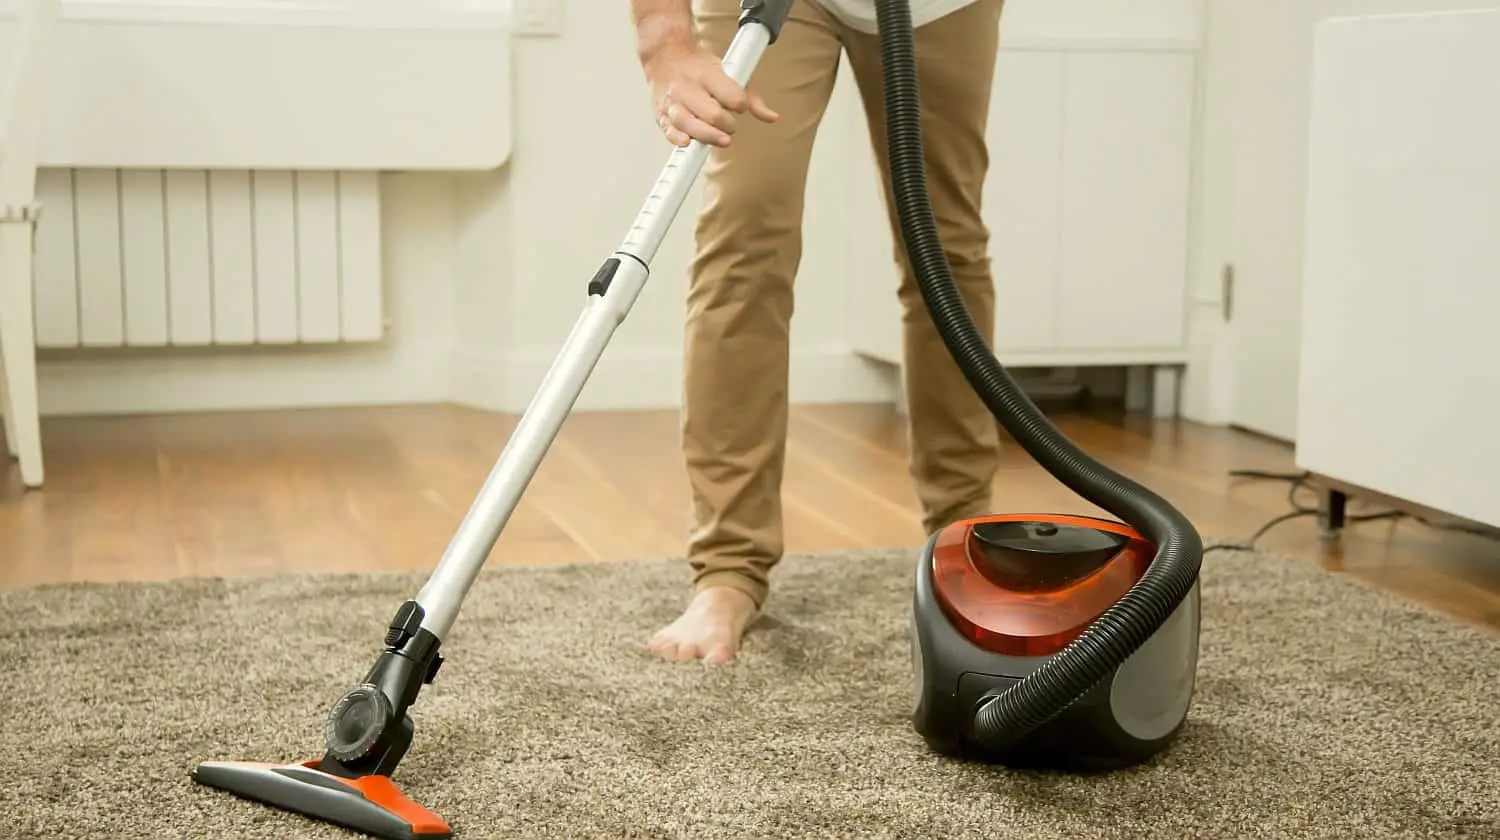 Best spring cleaning gadgets for your kitchen » Gadget Flow